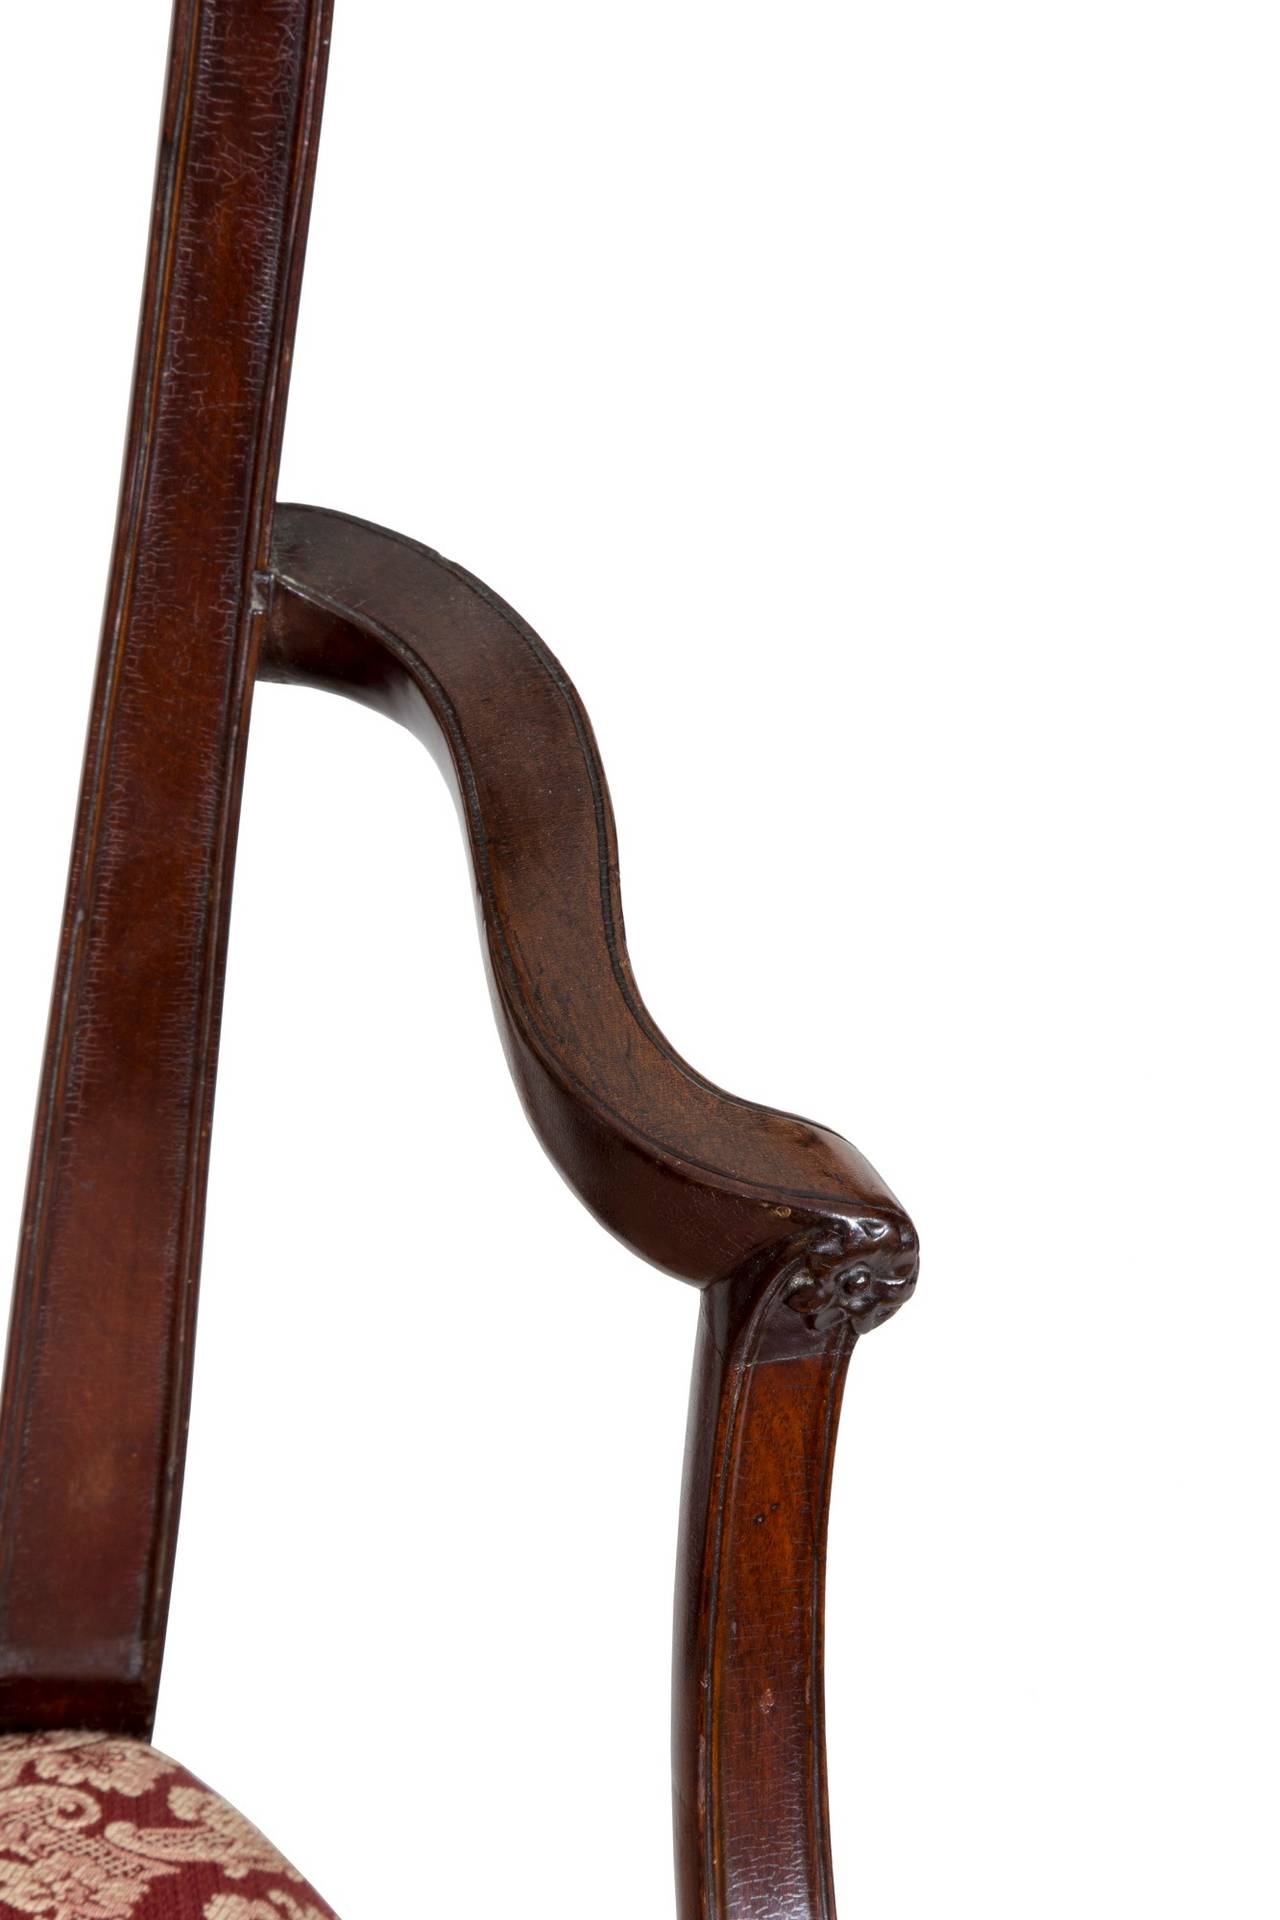 Attribution is based on a labeled chair, antiques April, 1961, page 374, George Shipley: His Furniture and his Label (see scan). 

The arched crest in this example centers on a finely carved Prince of Wales feathers splat which hearkens to its